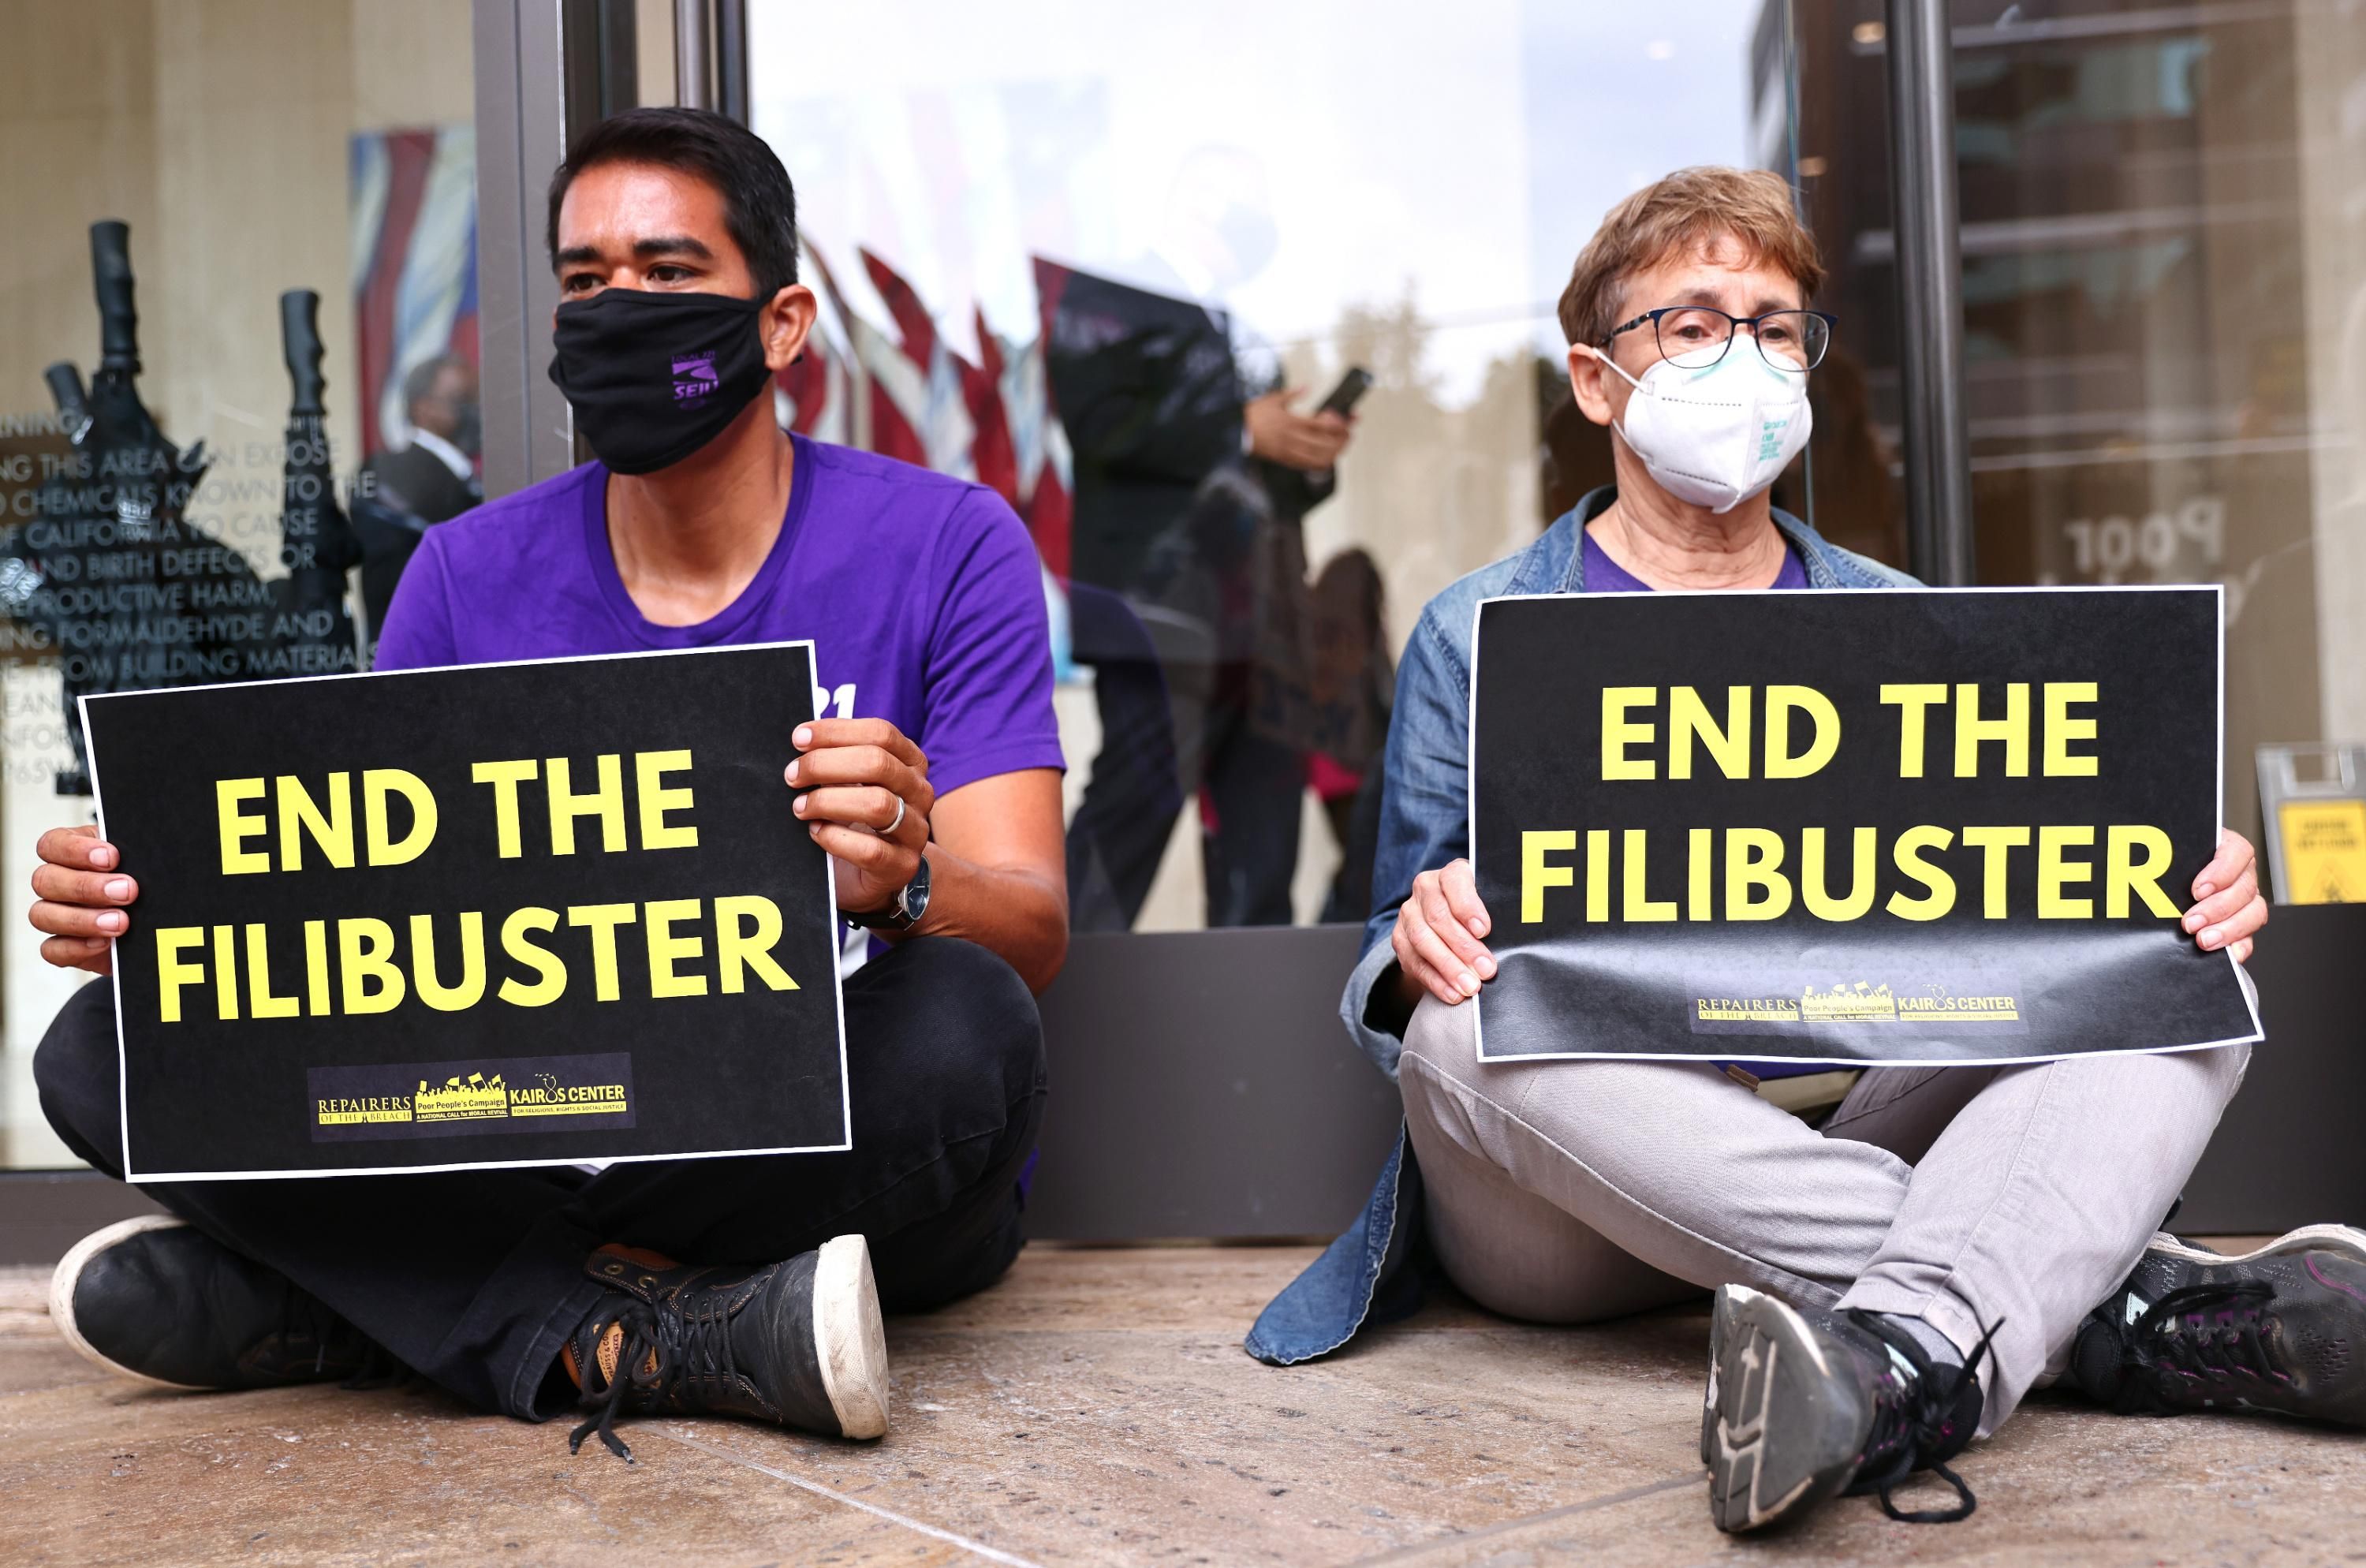 Demonstrators hold a sit-in calling for an end to the filibuster